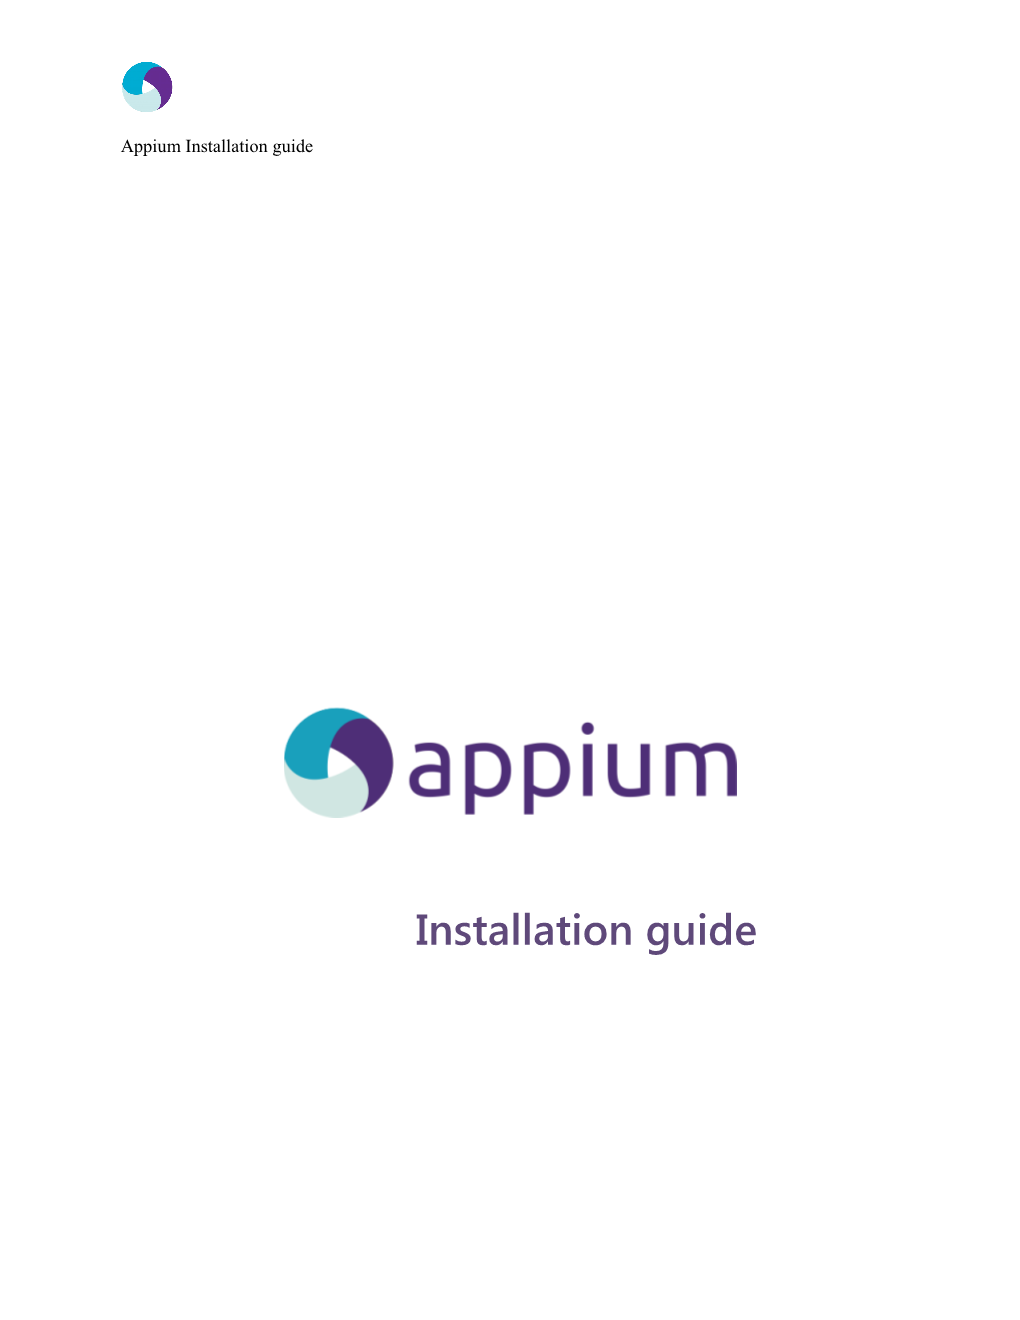 Appium Is an Open Source , Cross Platform Test Automation Tool for Mobile Apps